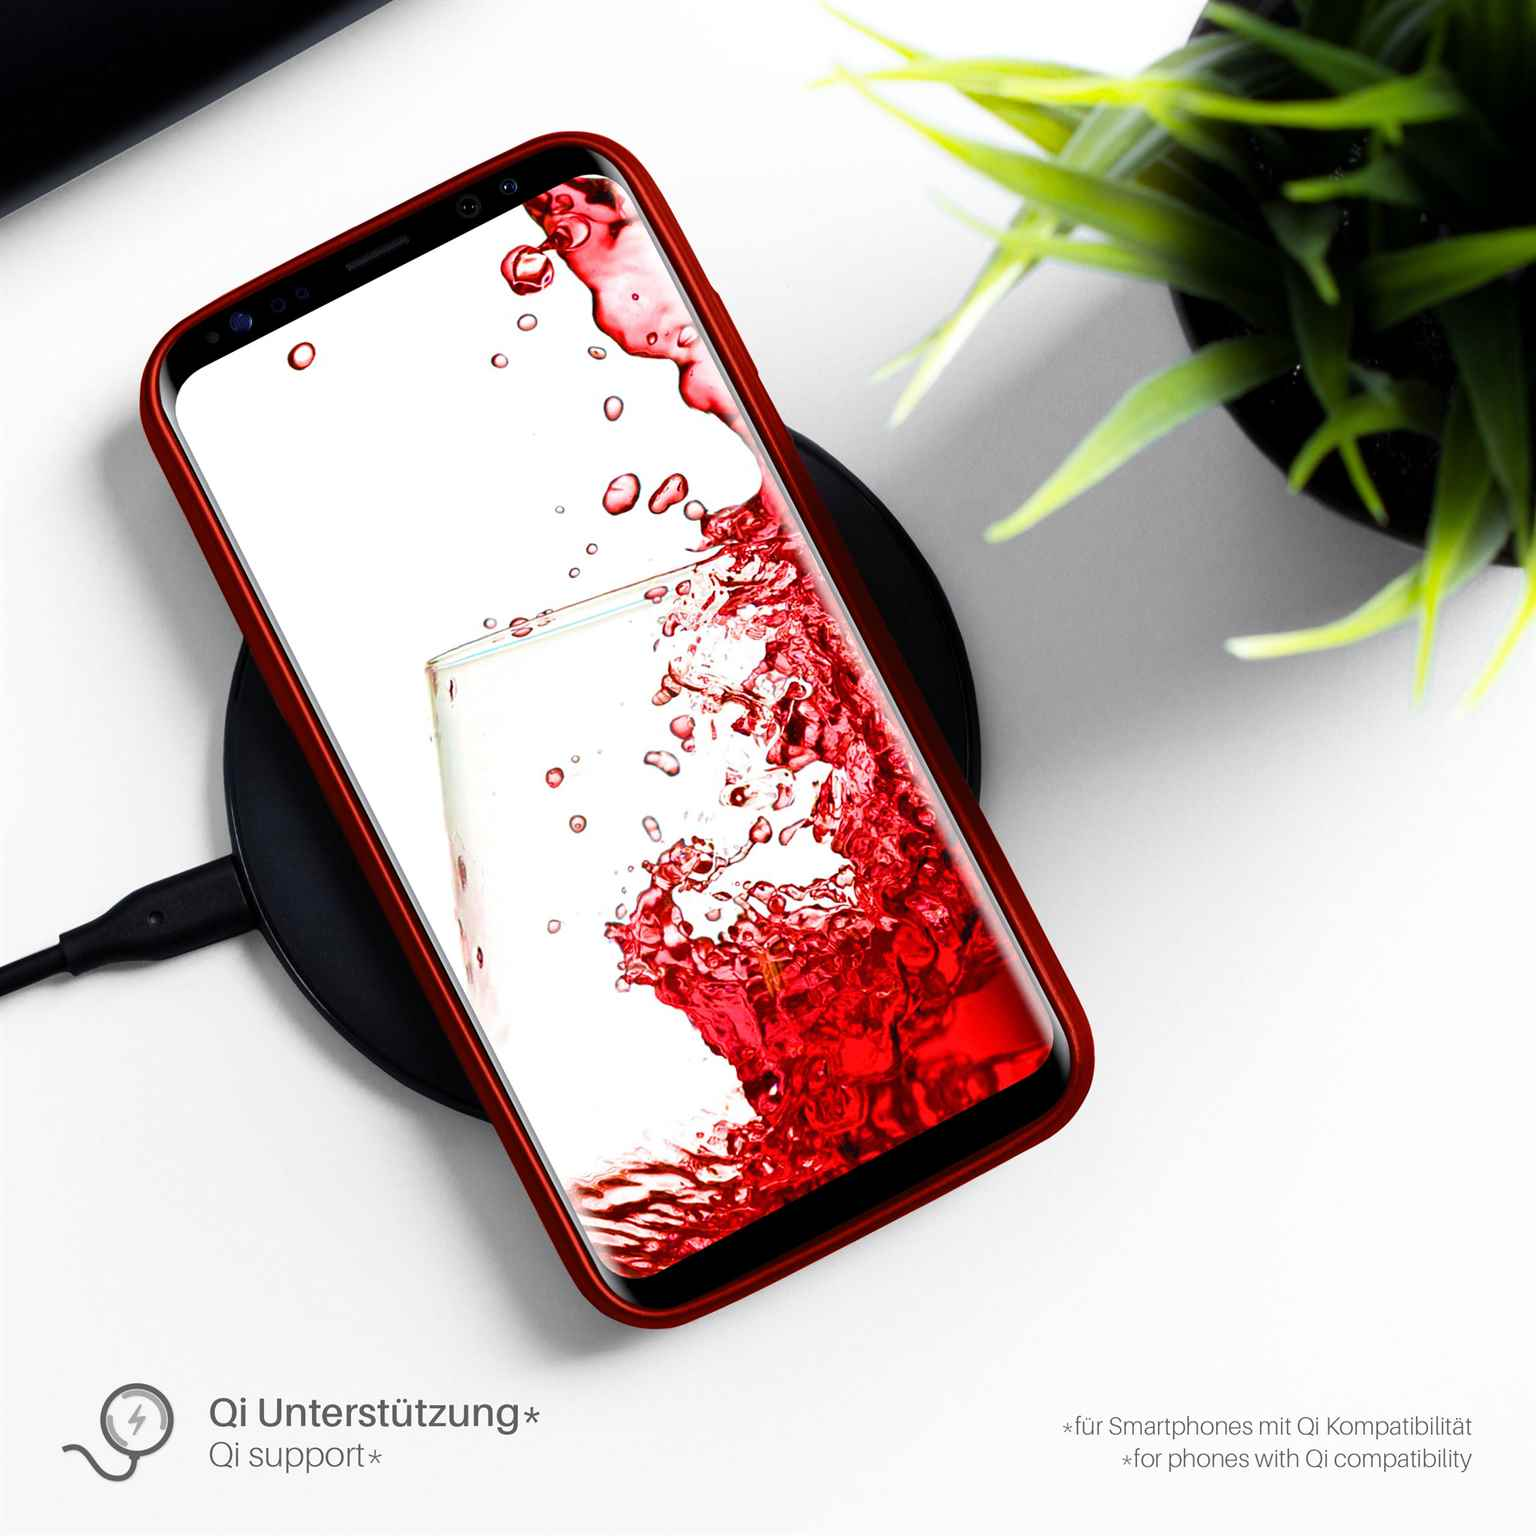 Galaxy Backcover, Crimson-Red Case, Brushed Samsung, S8, MOEX